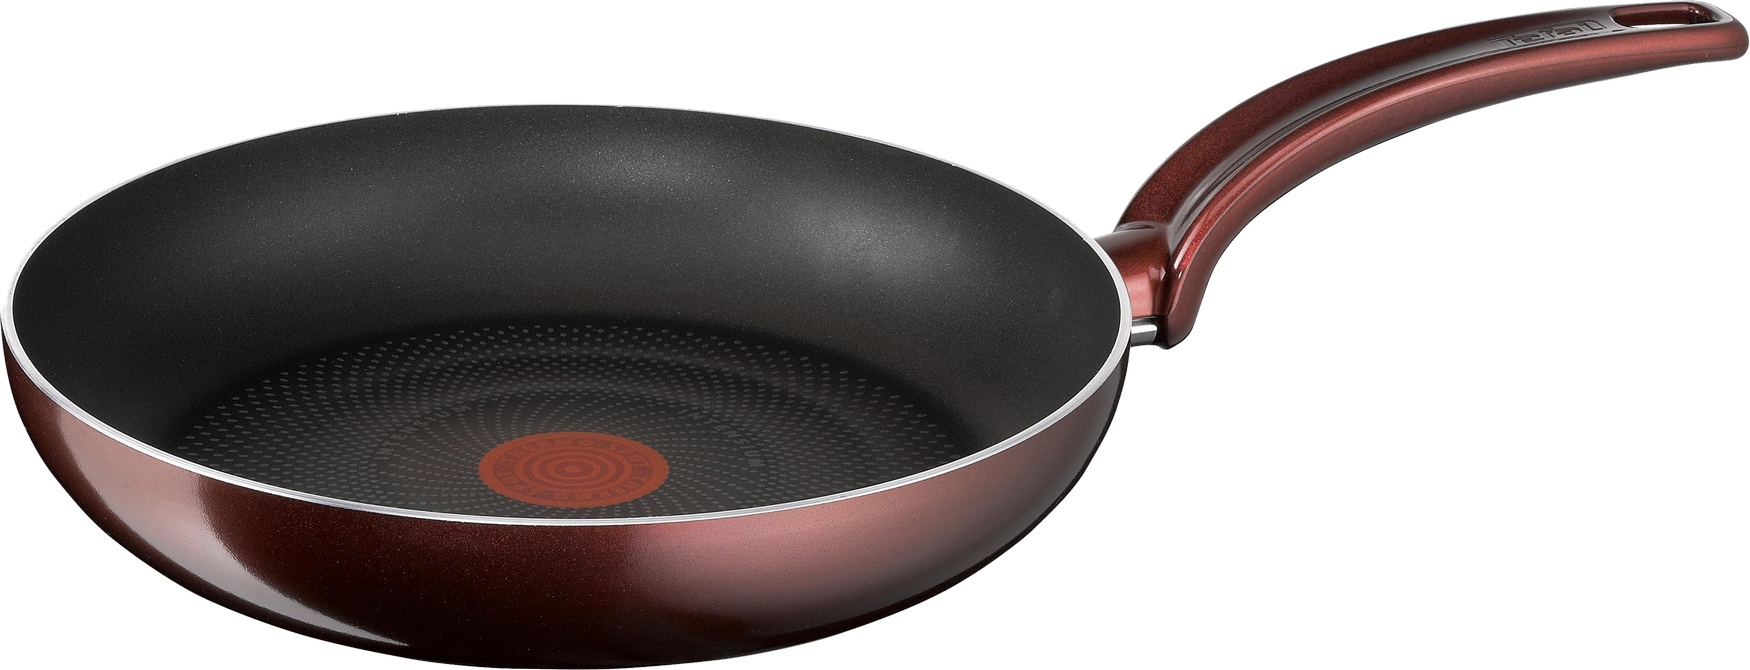 Frying Pan PNG Pic Background